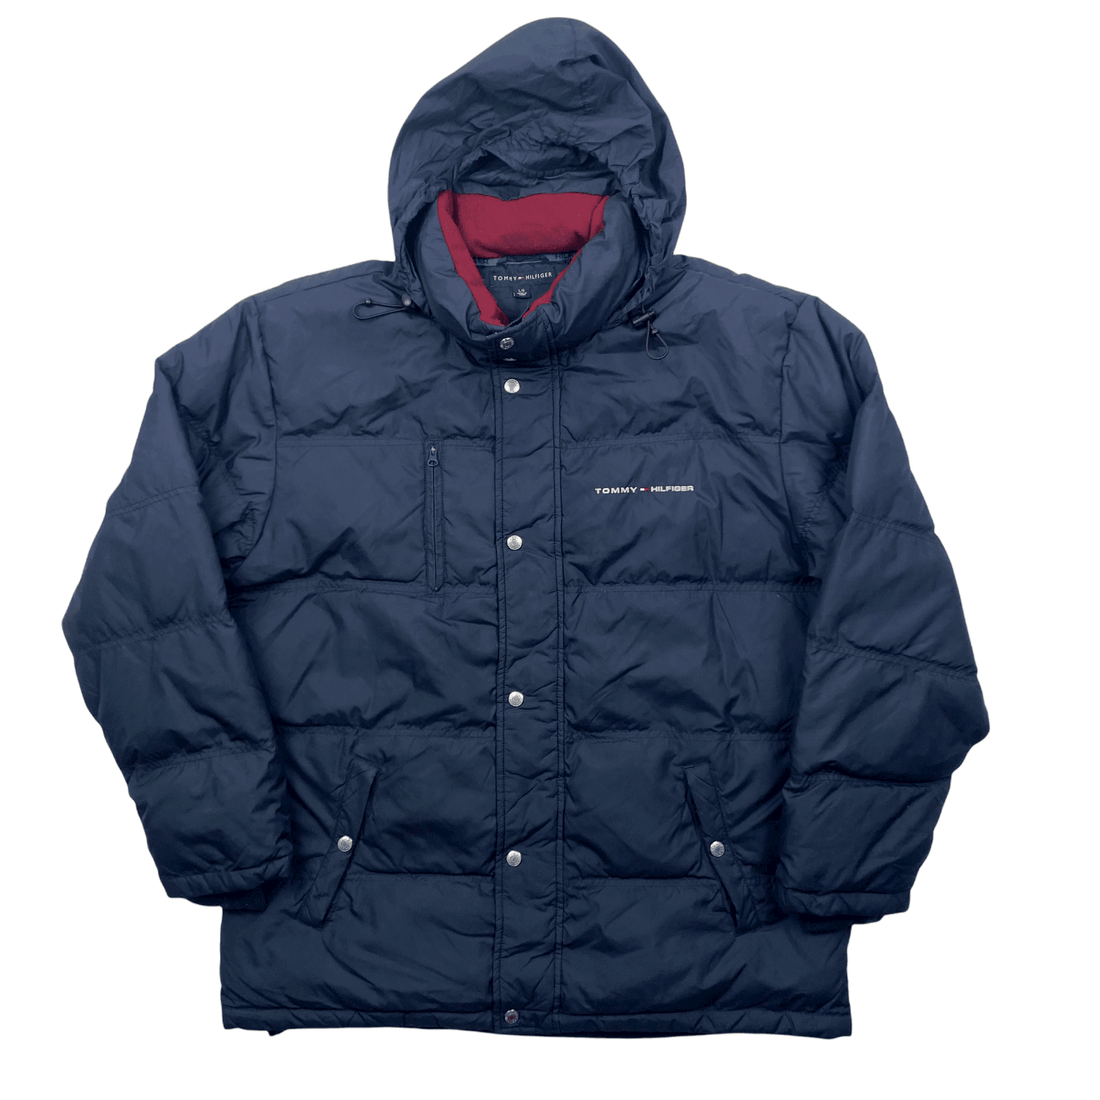 Vintage Navy Blue Tommy Hilfiger Spell-Out Puffer Coat/ Jacket - Large - The Streetwear Studio